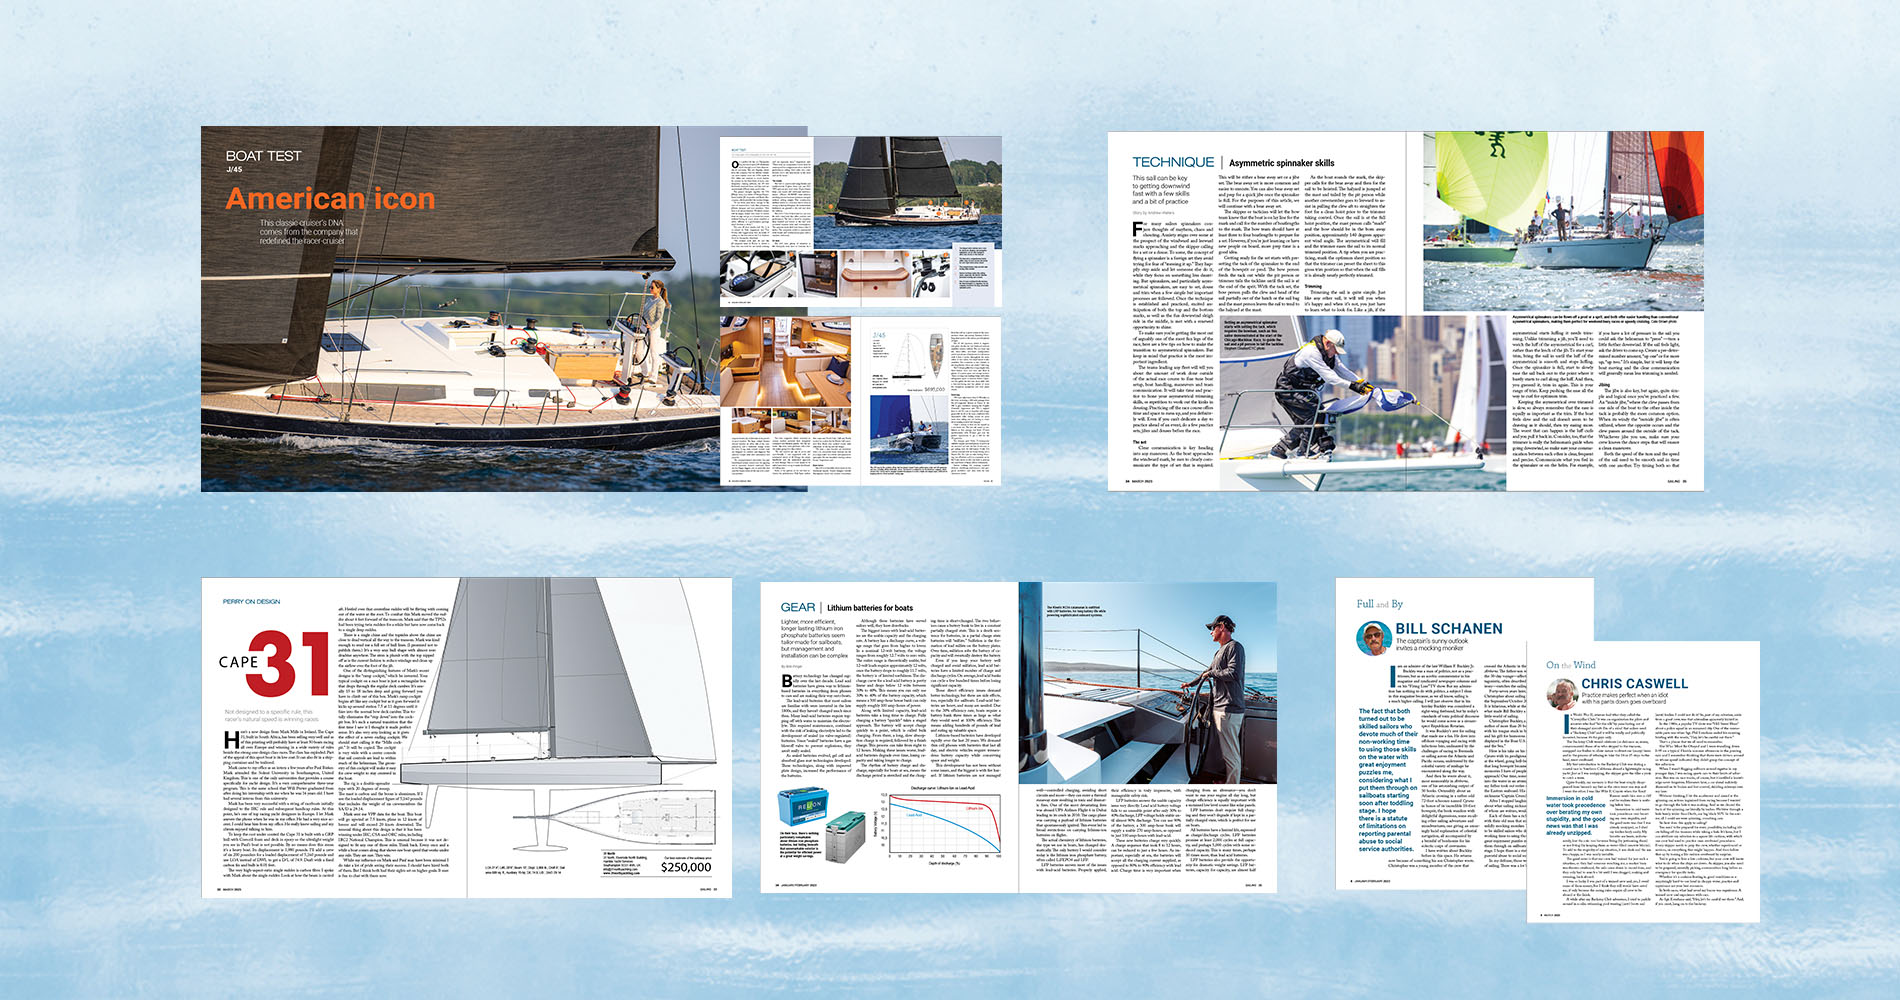 Beautiful features, Boat Test, Perry on Design, Gear reviews, How-to and more